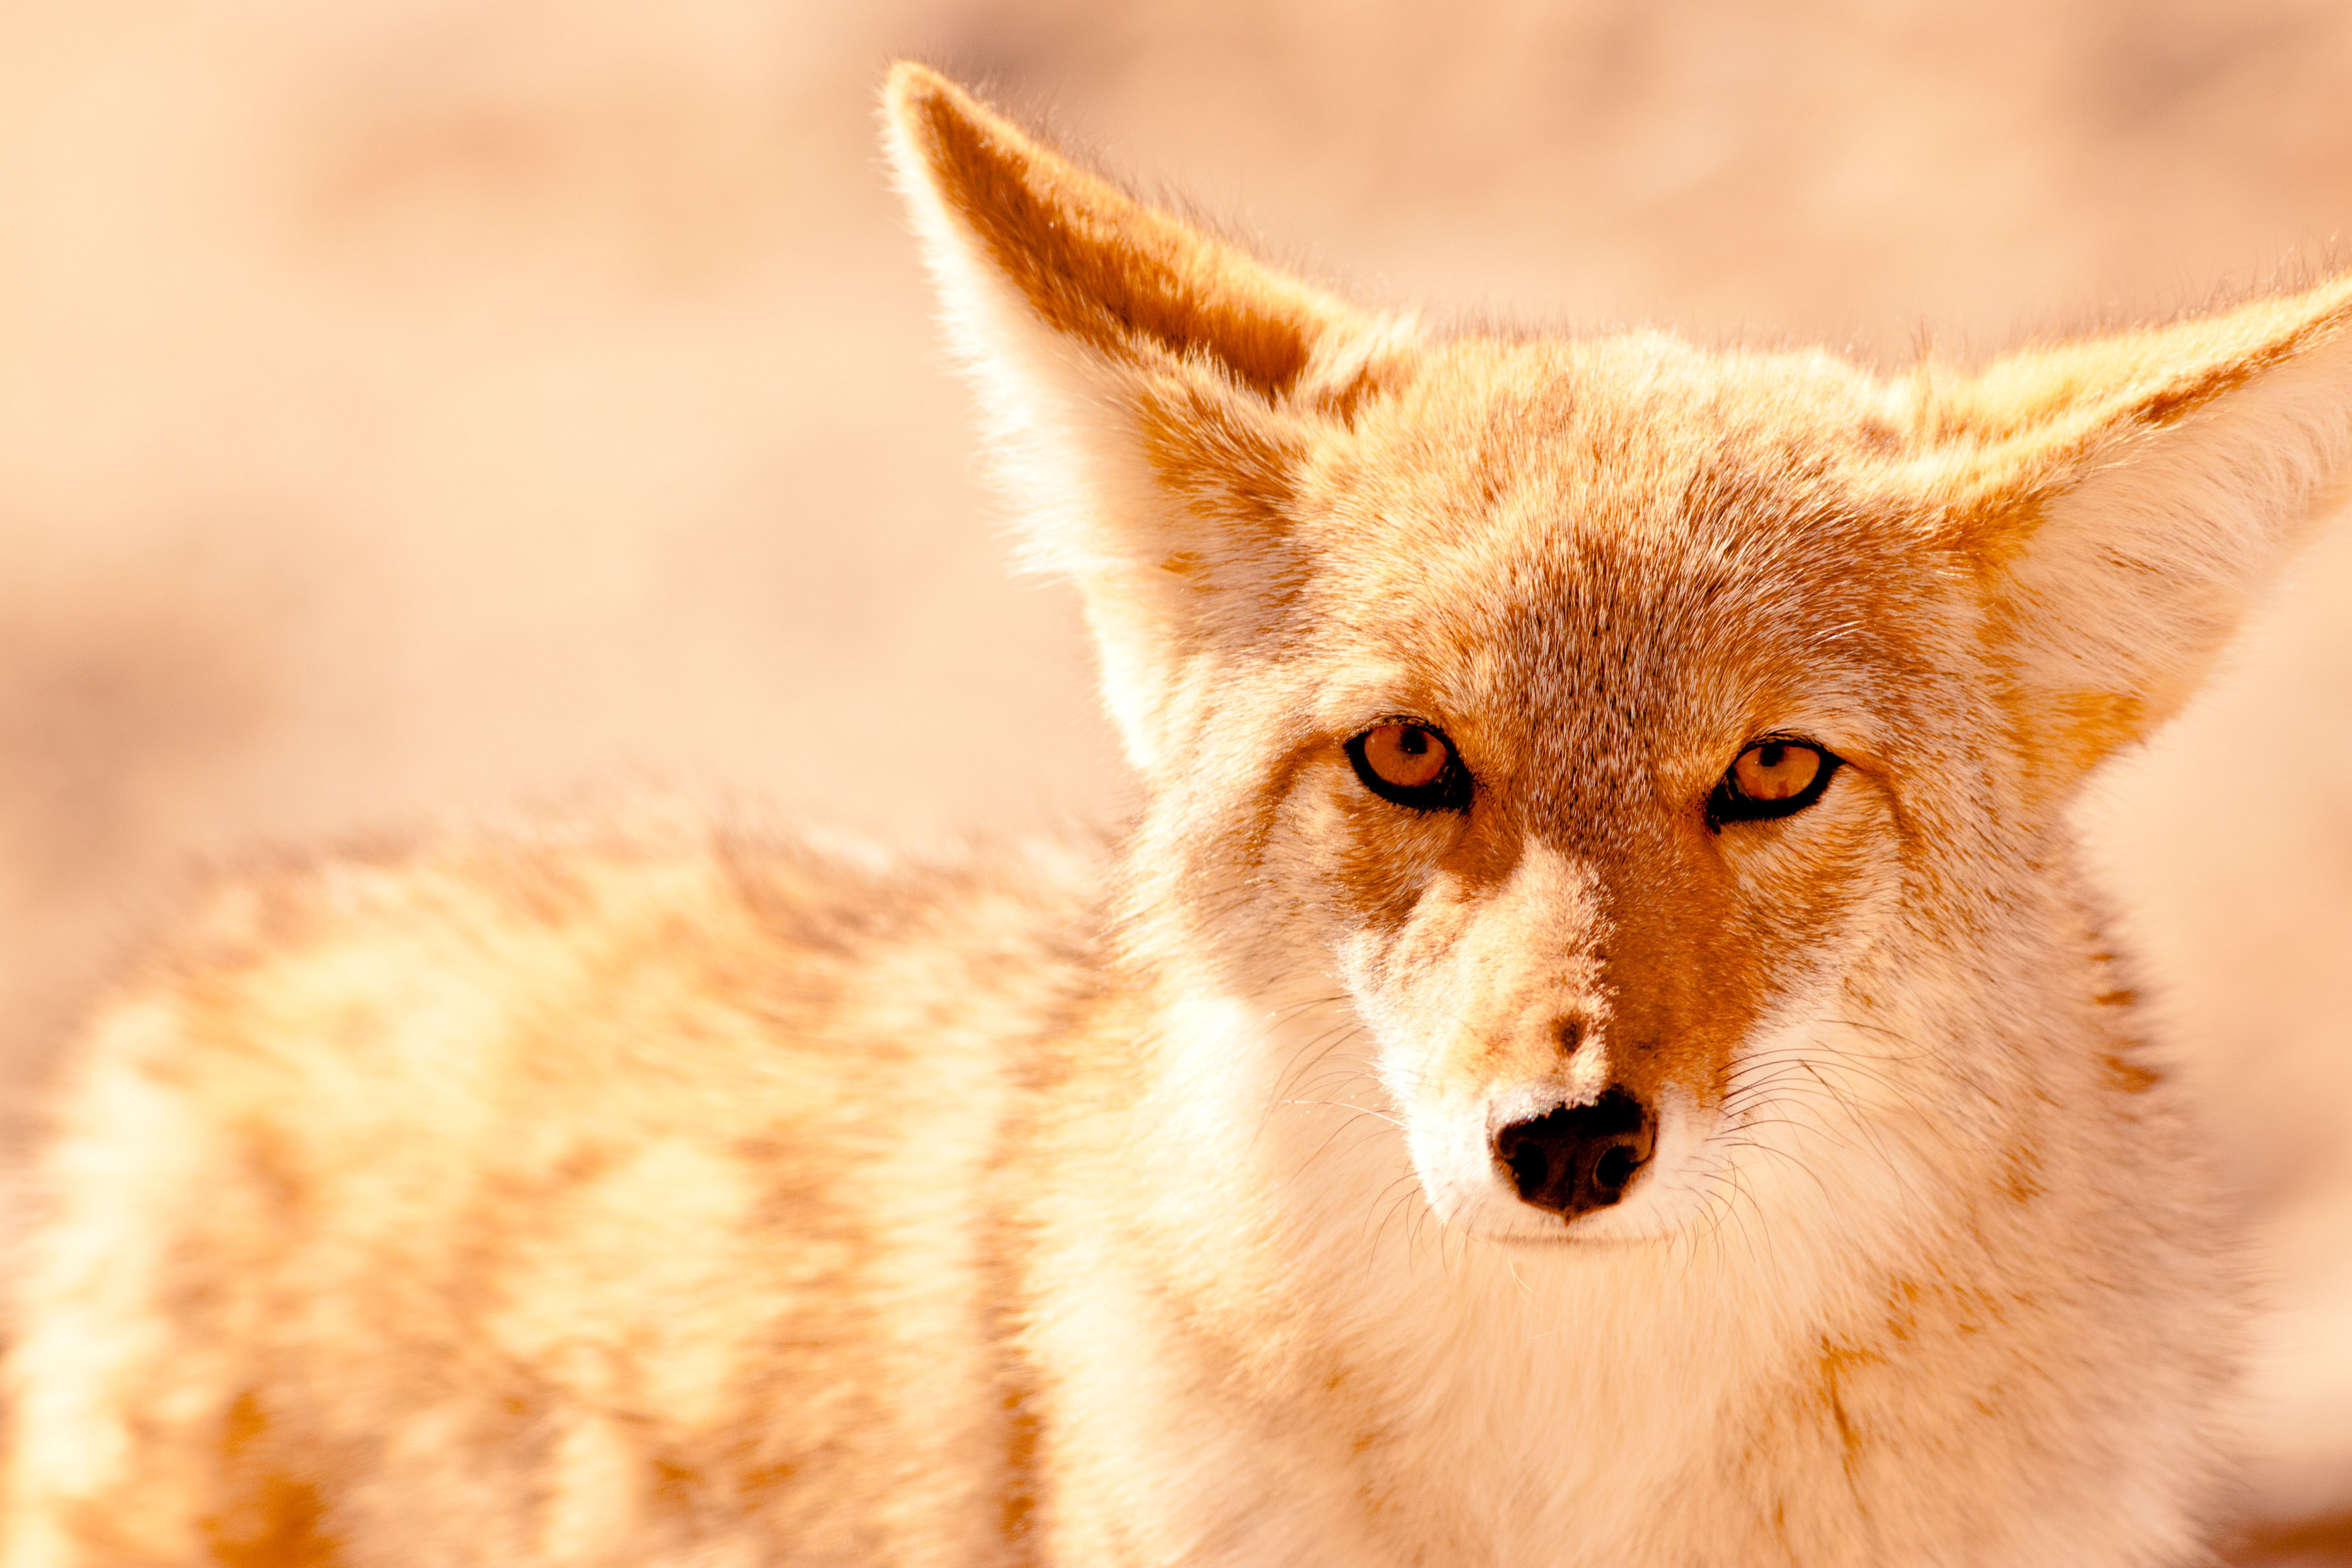 Shooting a coyote: Arizona firearm laws and regulations | The Daily